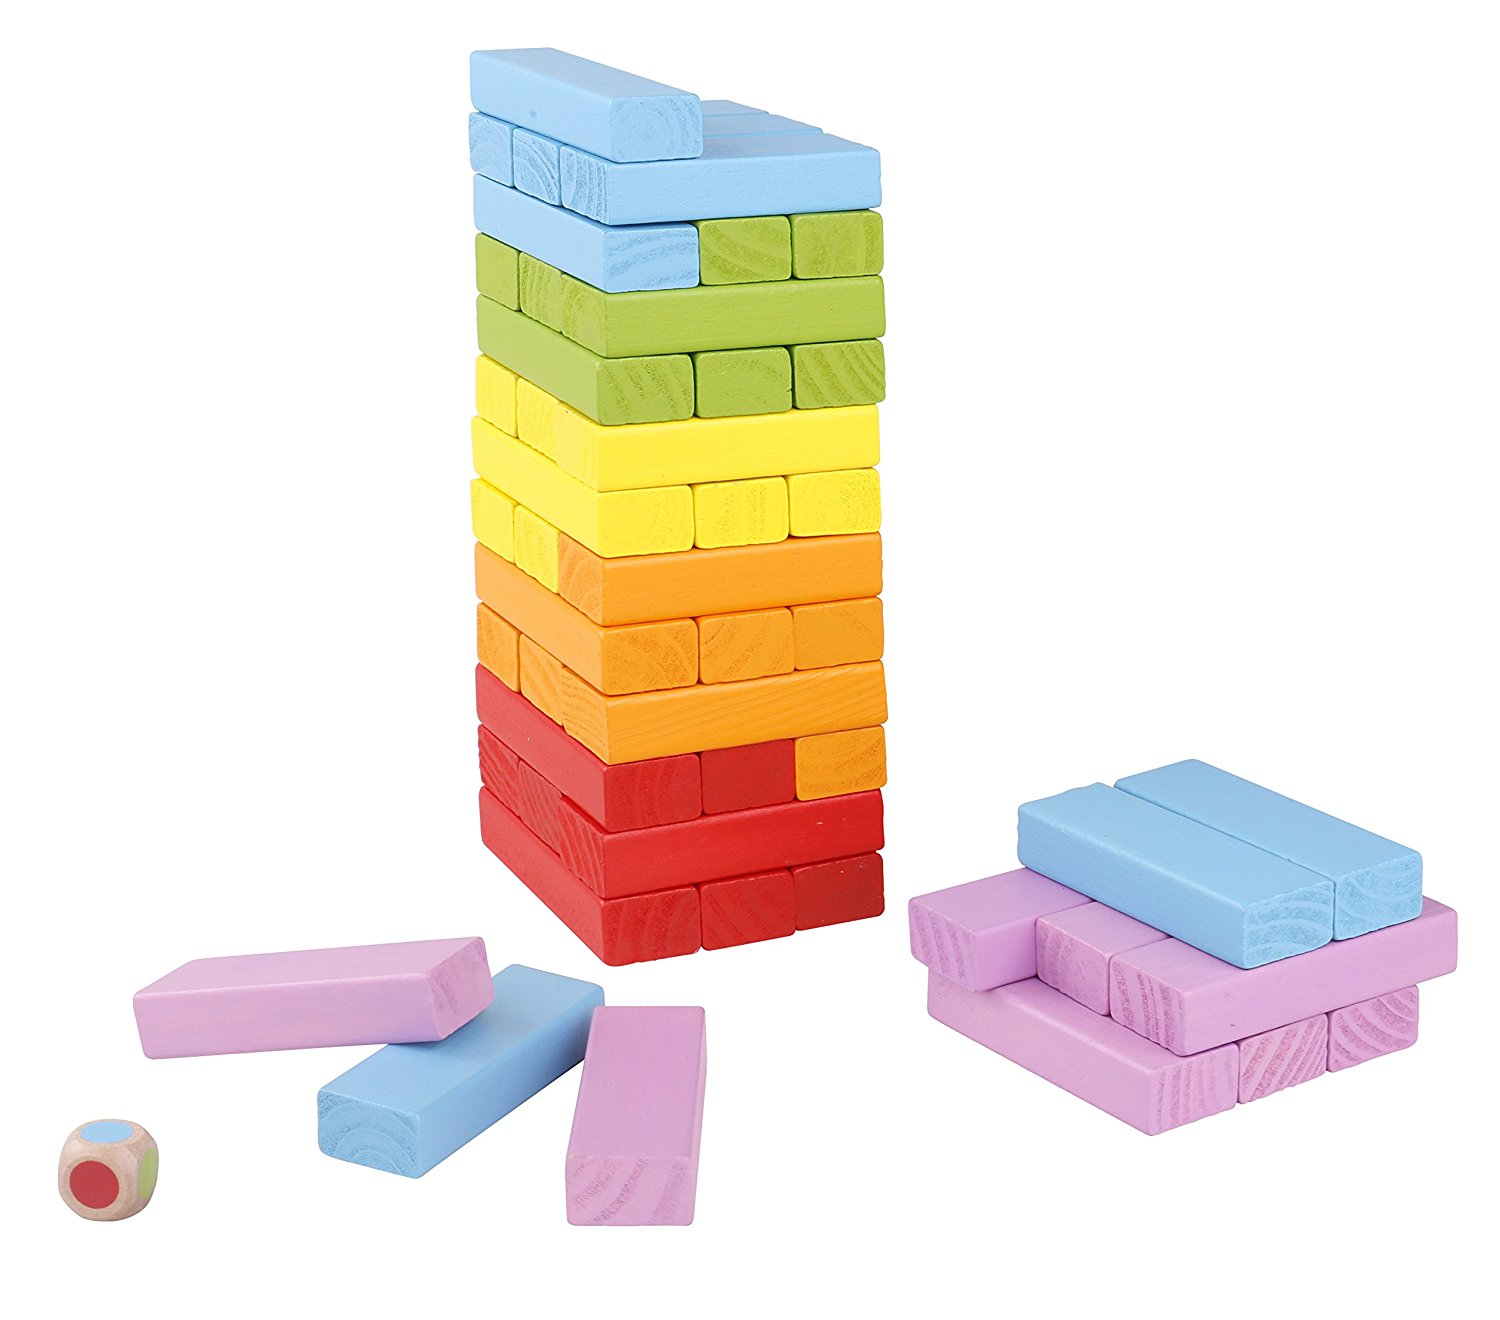 Stack The Block Game